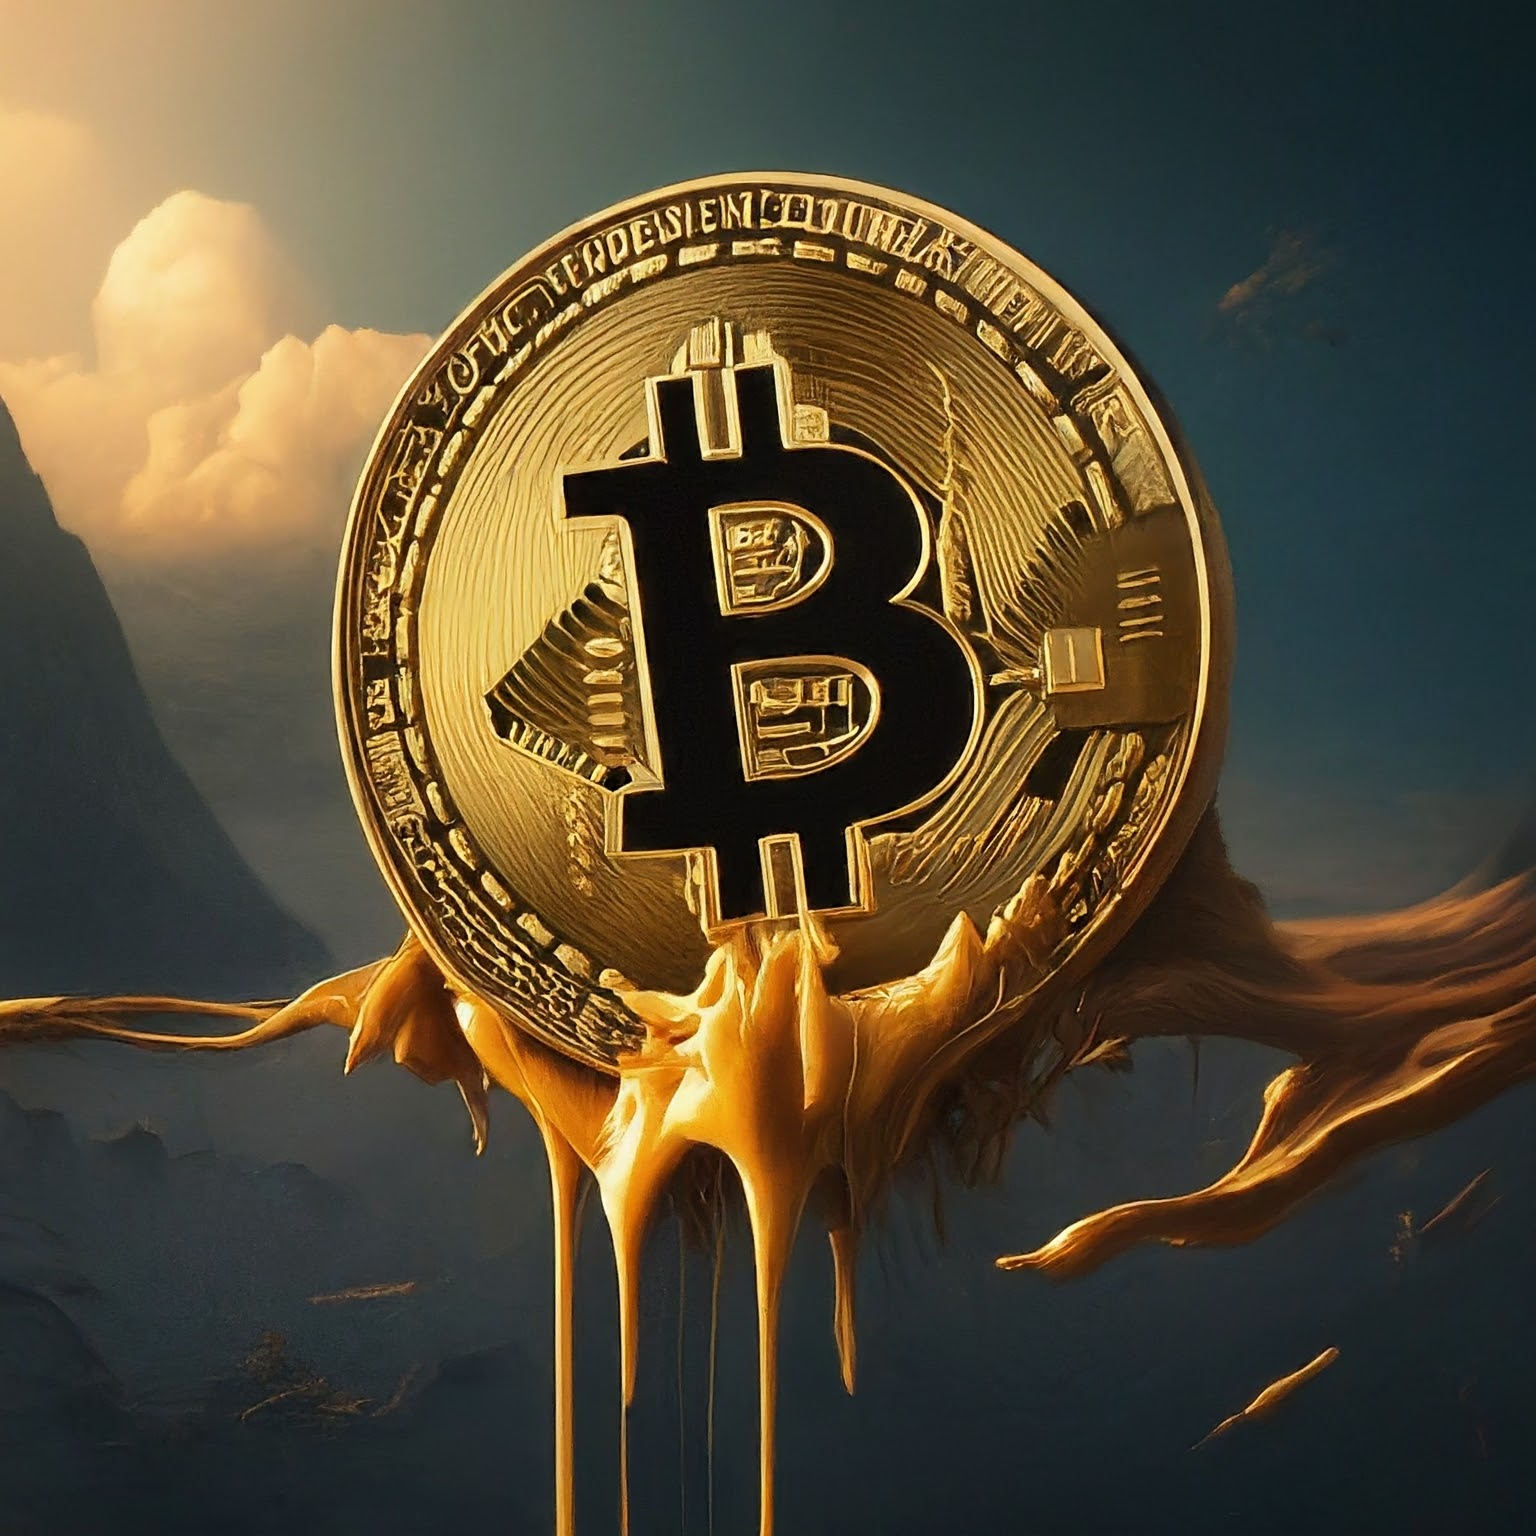 Metaplanet Inc. Issues ¥1 Billion in Bonds to Bolster Bitcoin Holdings